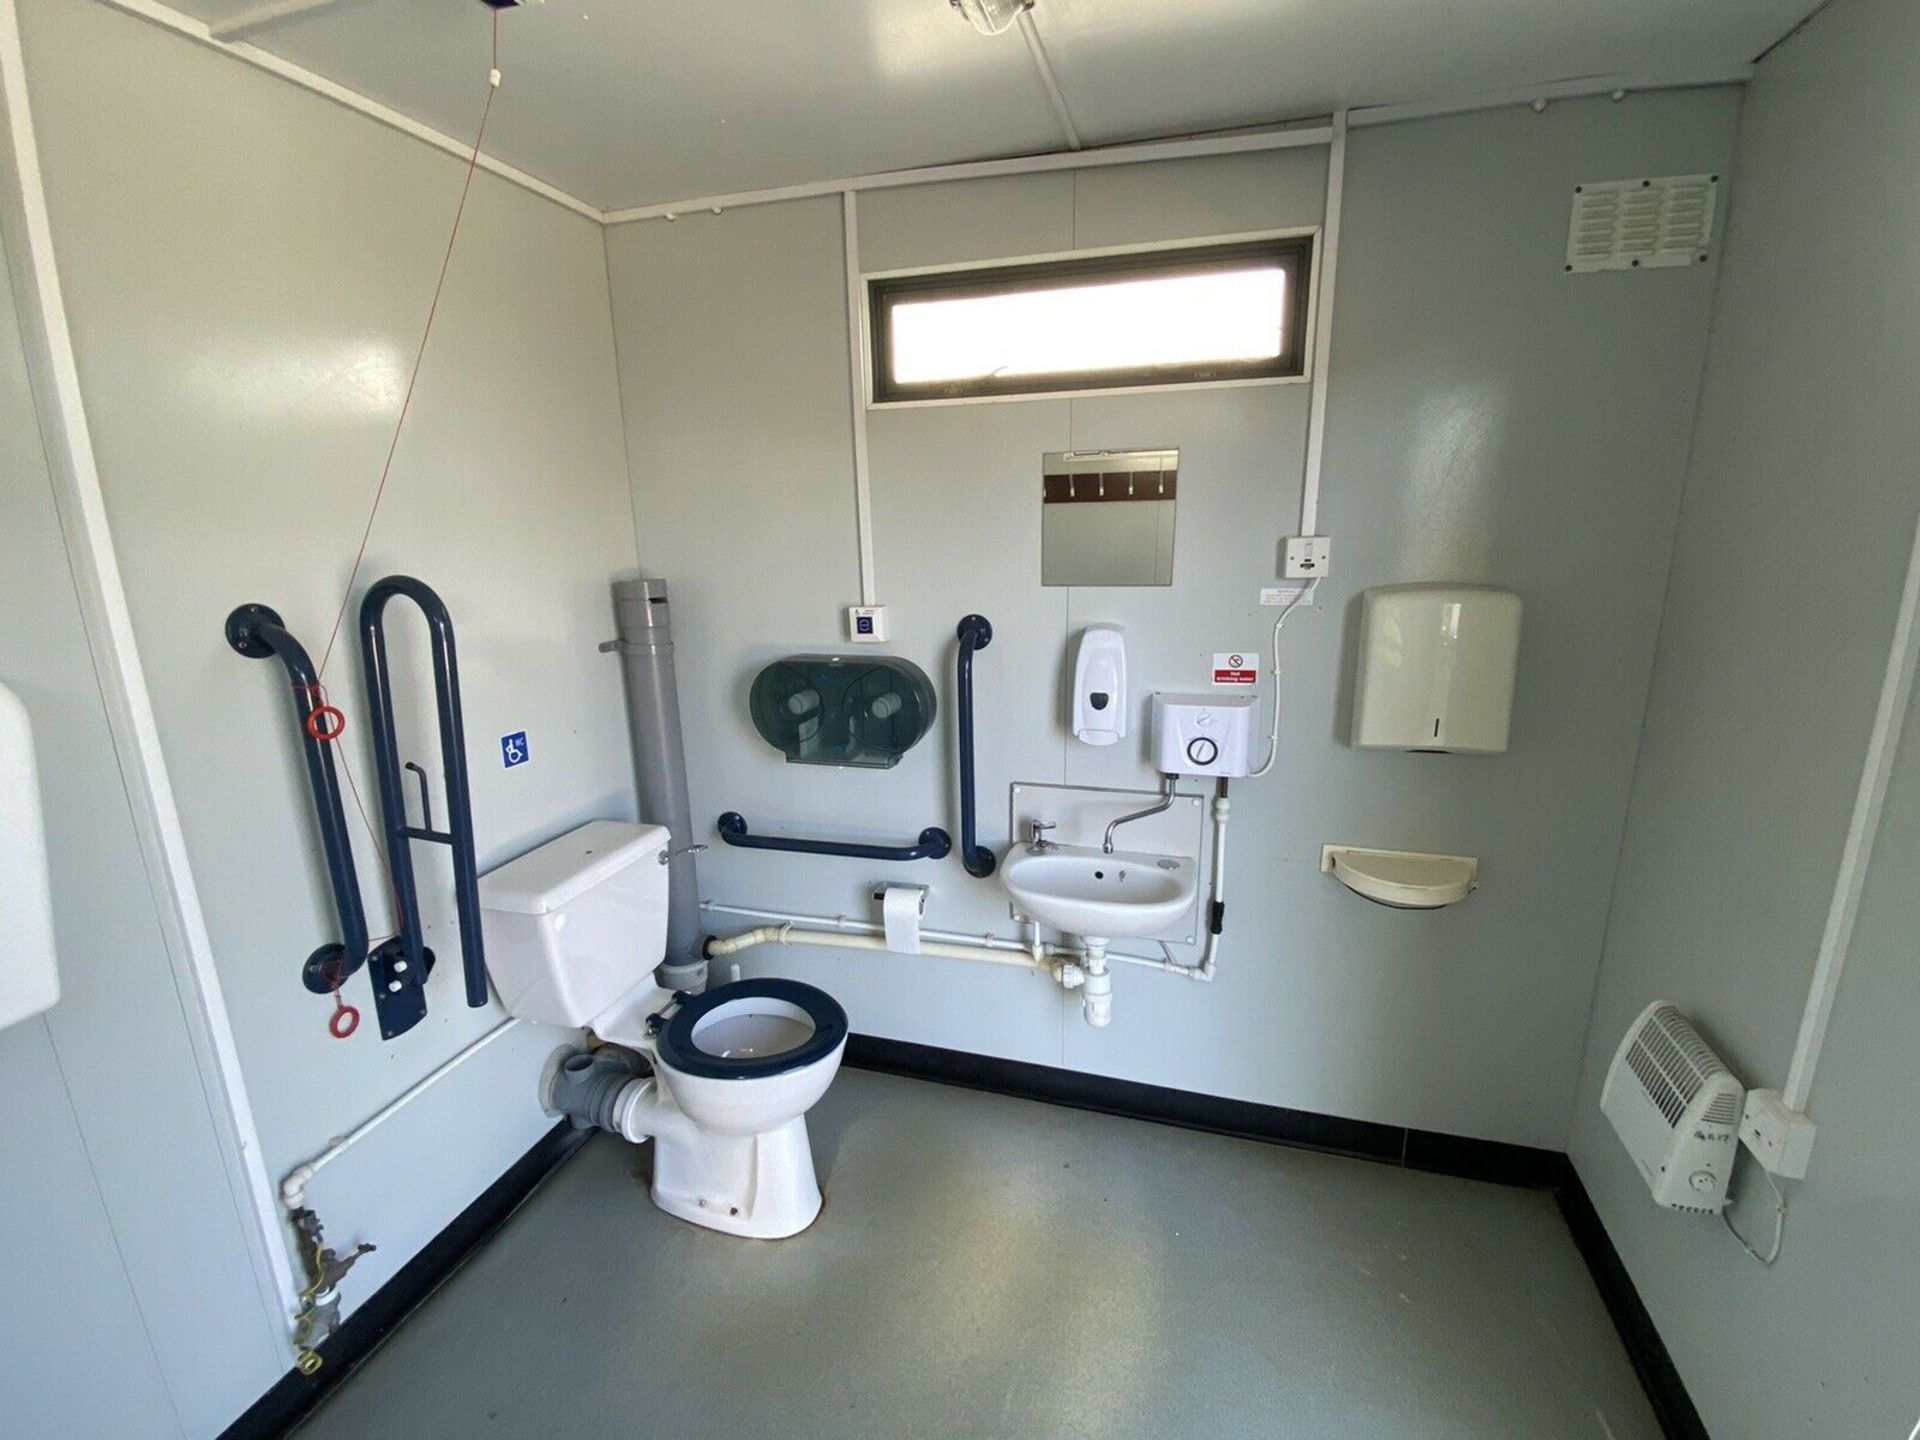 8ft X 8ft Disabled Toilet Block, Site Cabin - Image 2 of 12